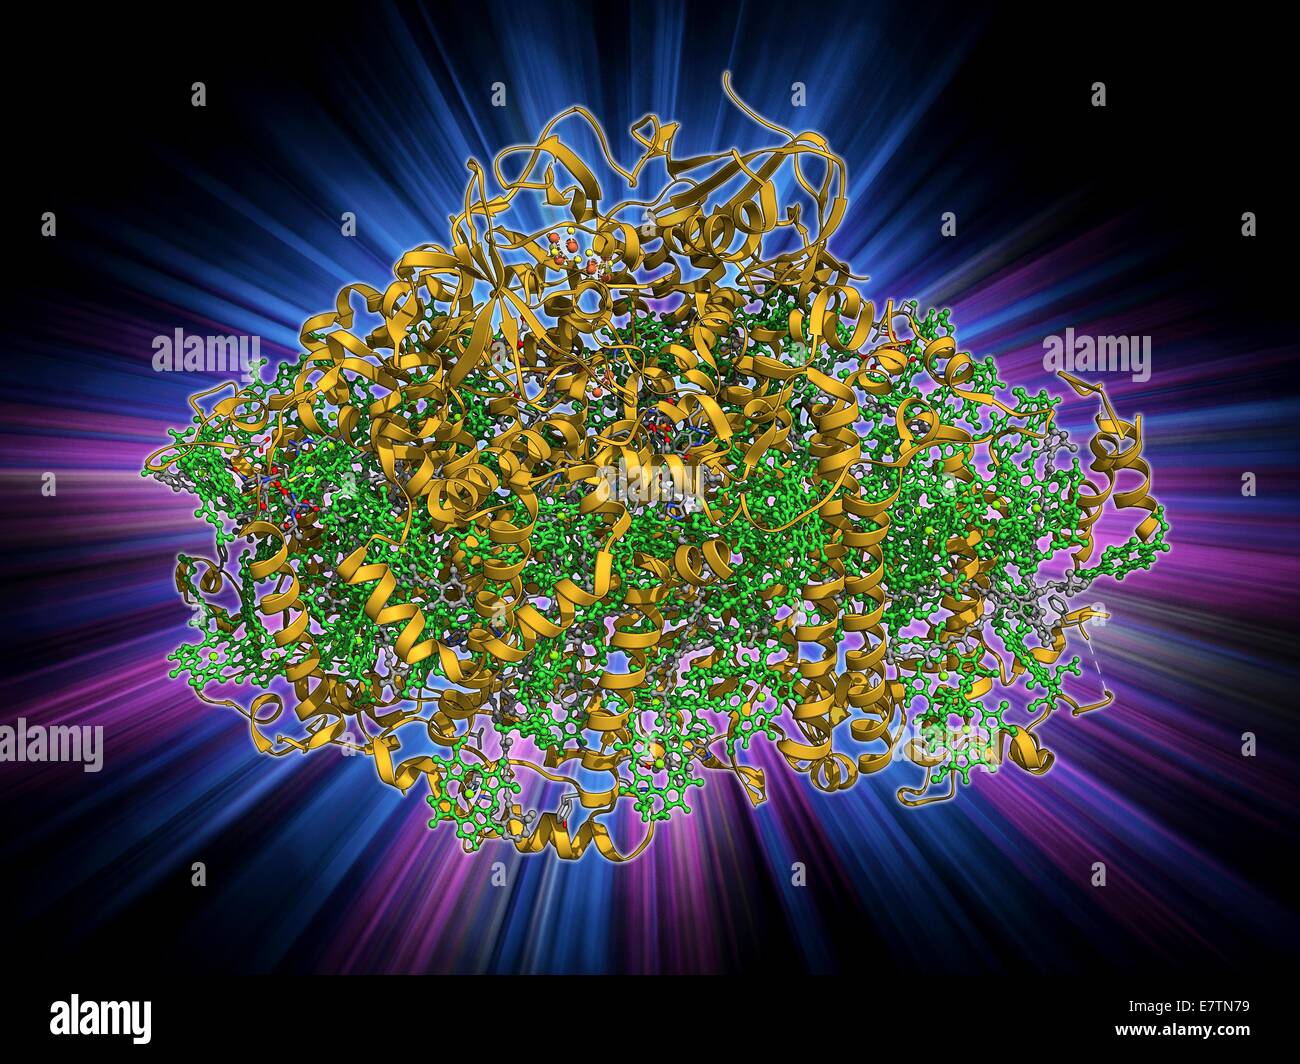 Photosystem I. Molecular model of the photosystem I complex from the cyanobacterium Synechococcus elongatus. Shown here are beta-carotene, alpha-chlorophyll and reaction centre subunits. Photosystems are protein complexes involved in photosynthesis. They Stock Photo